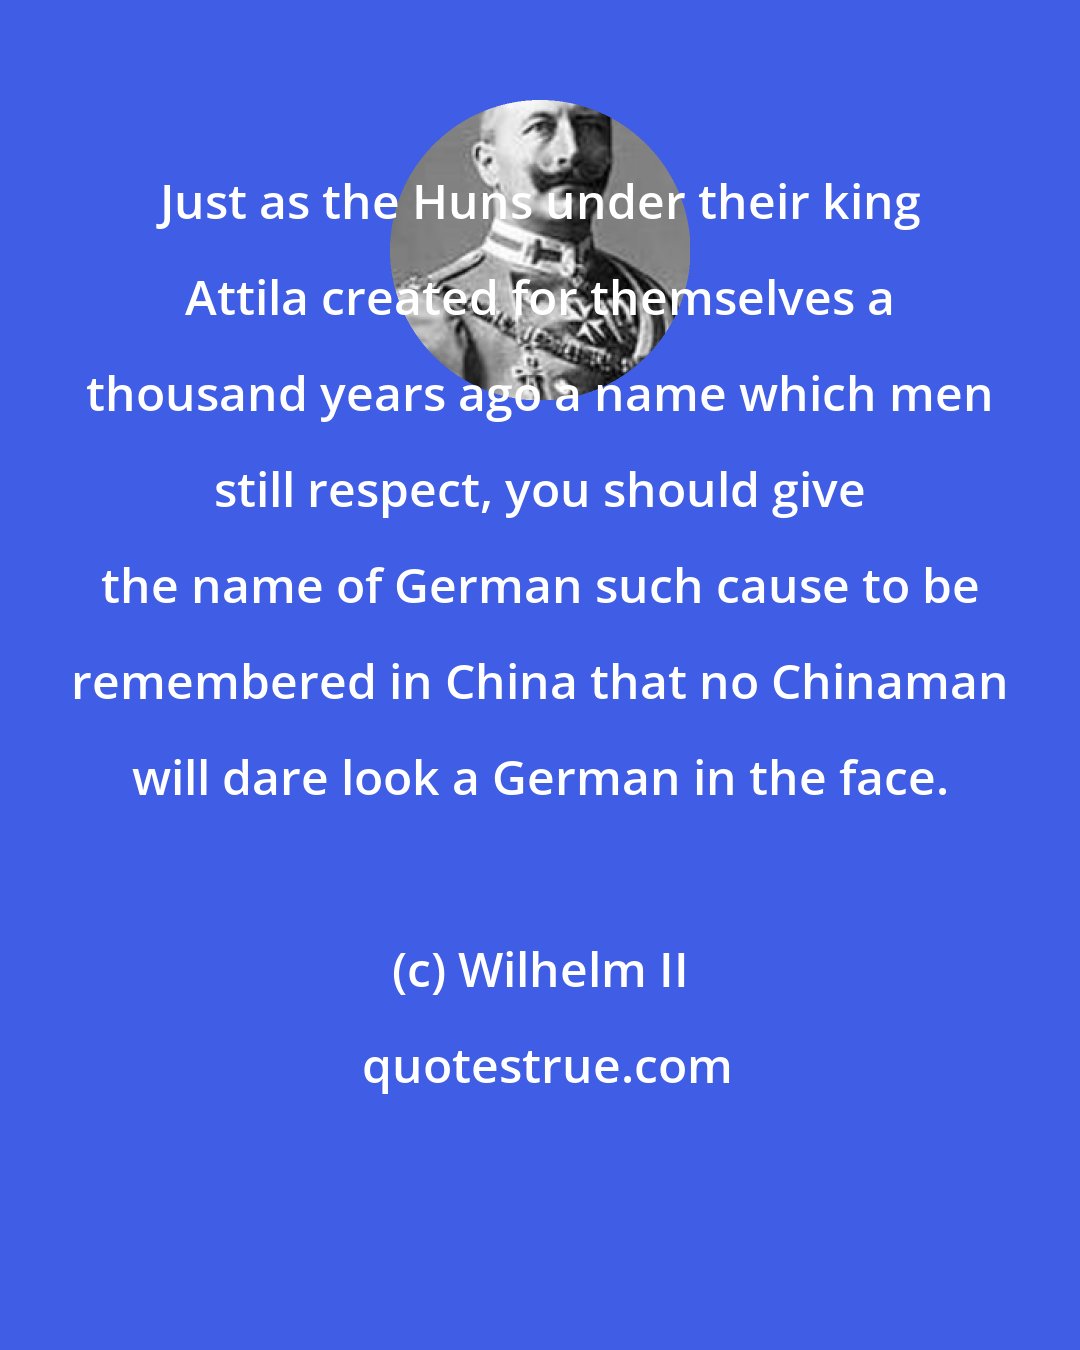 Wilhelm II: Just as the Huns under their king Attila created for themselves a thousand years ago a name which men still respect, you should give the name of German such cause to be remembered in China that no Chinaman will dare look a German in the face.